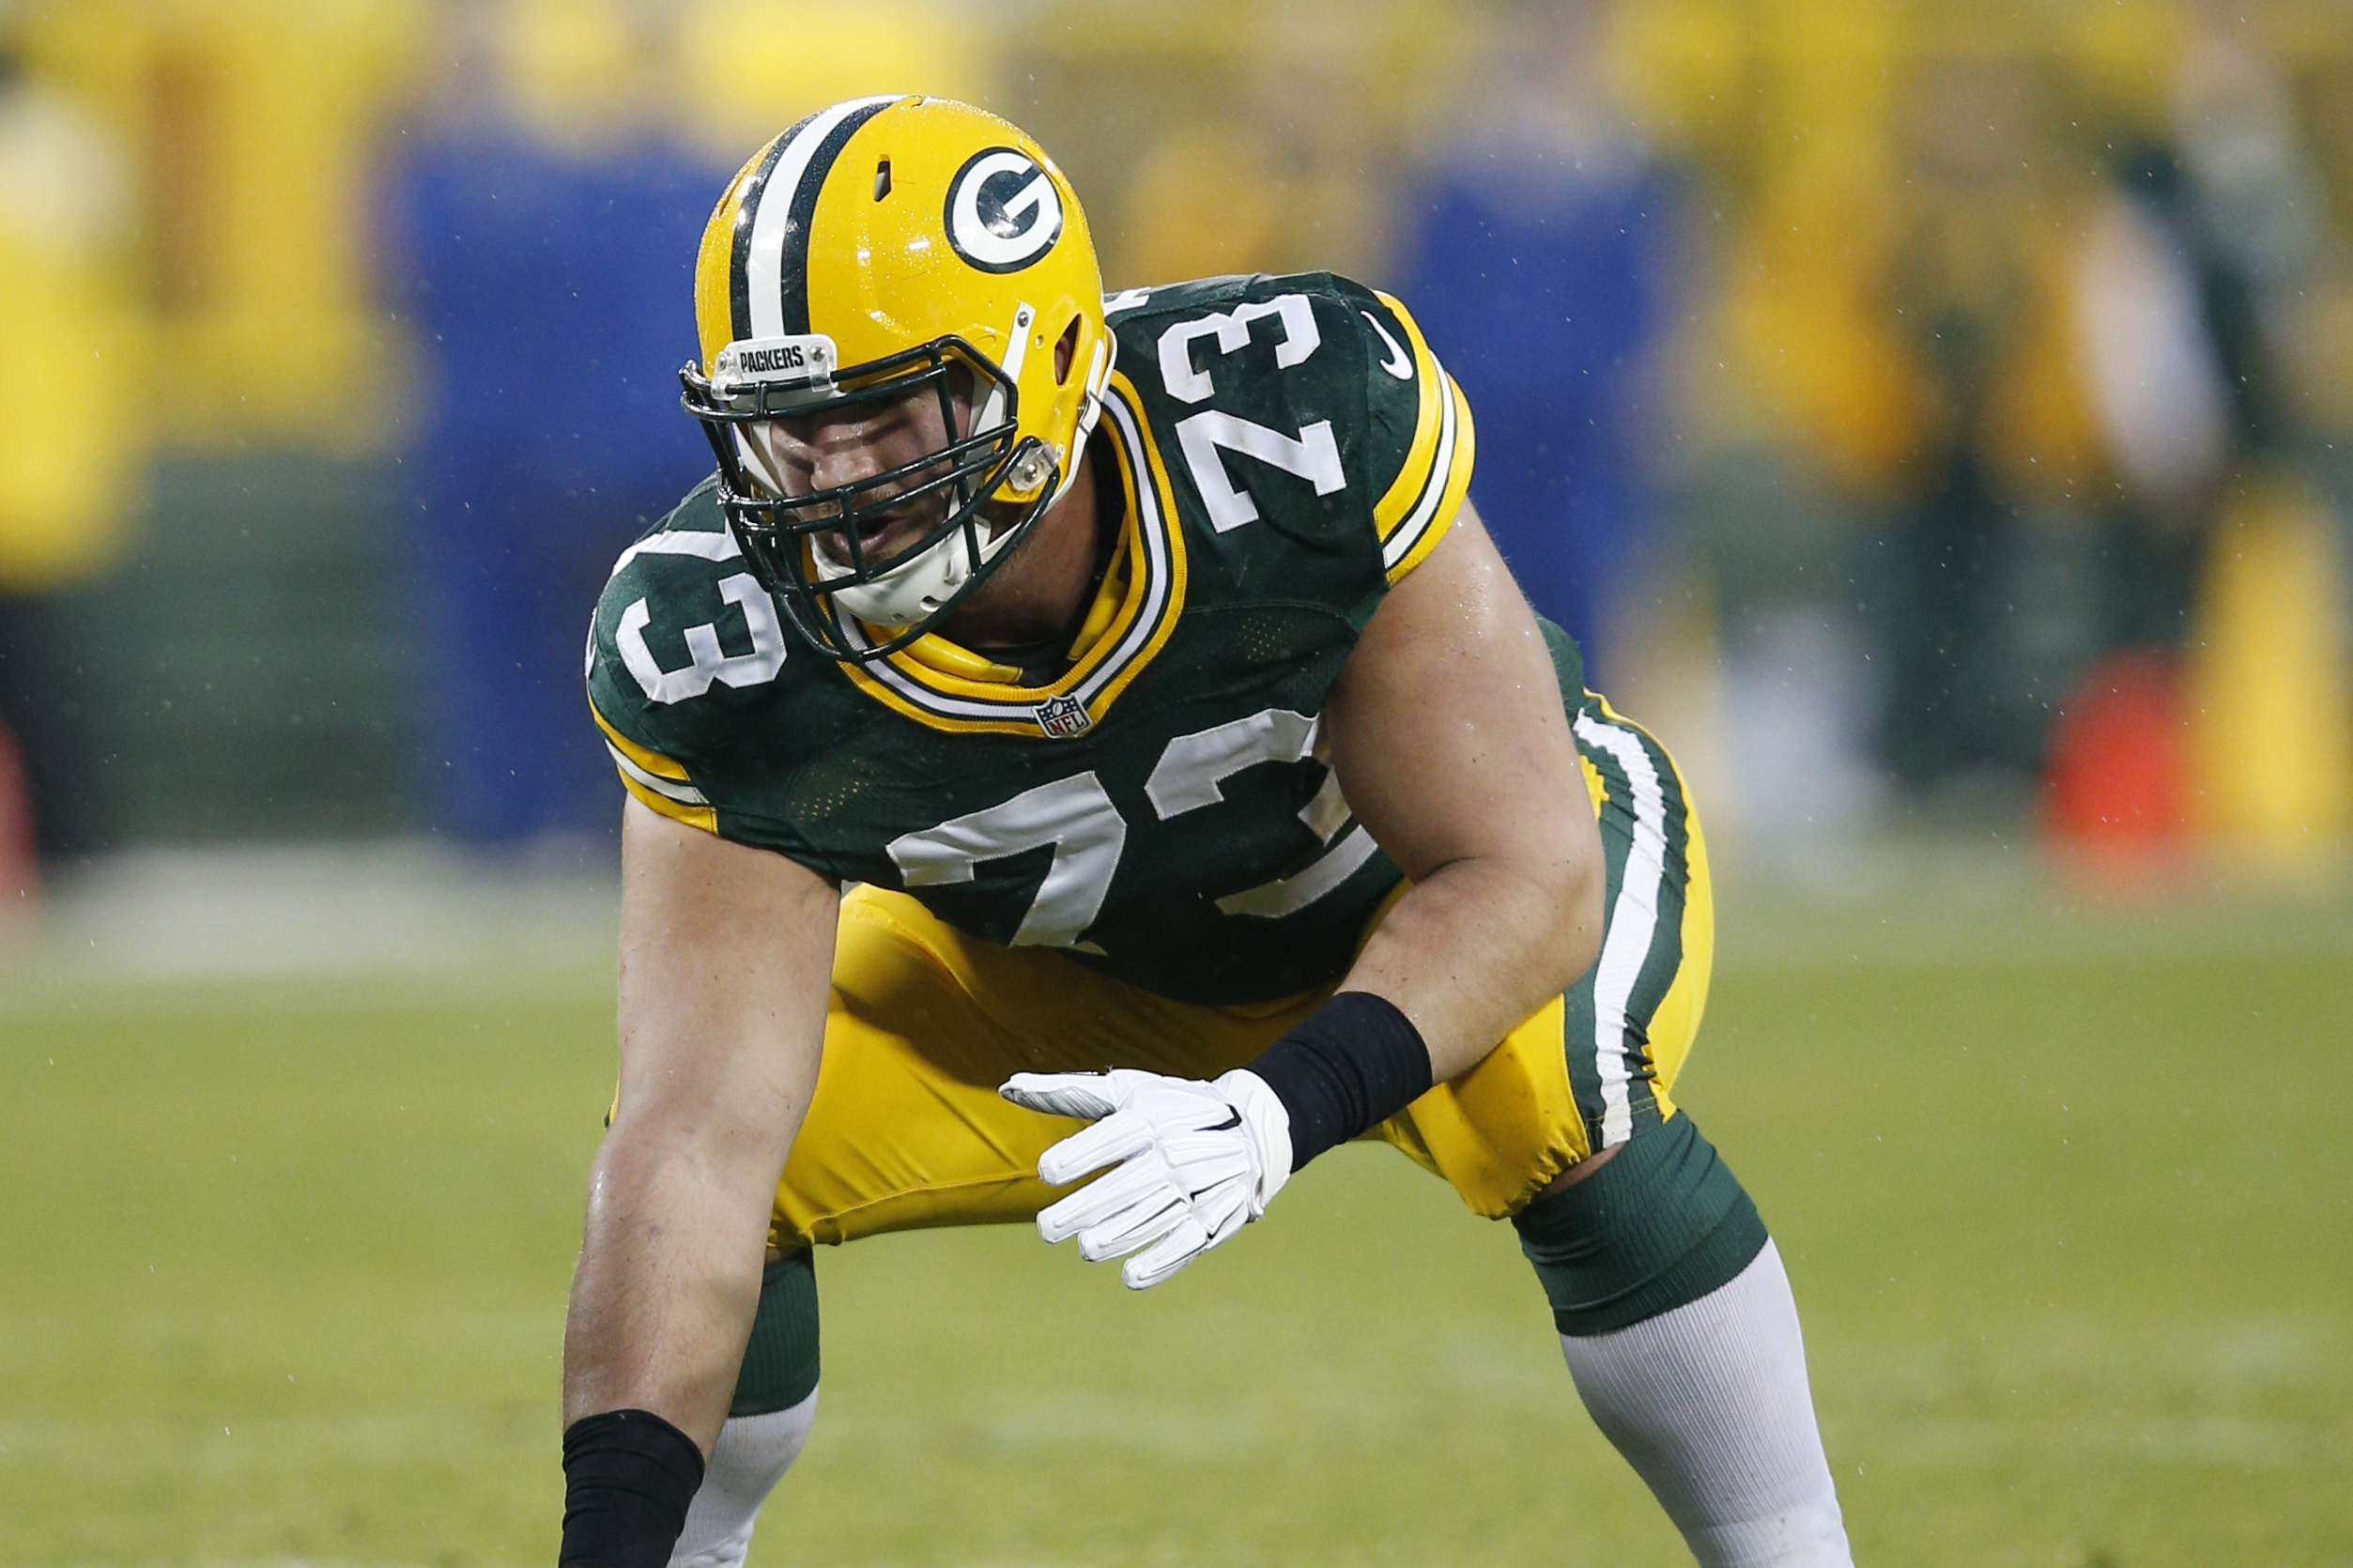 JC Tretter spent four injury-plagued seasons with the Green Bay Packers